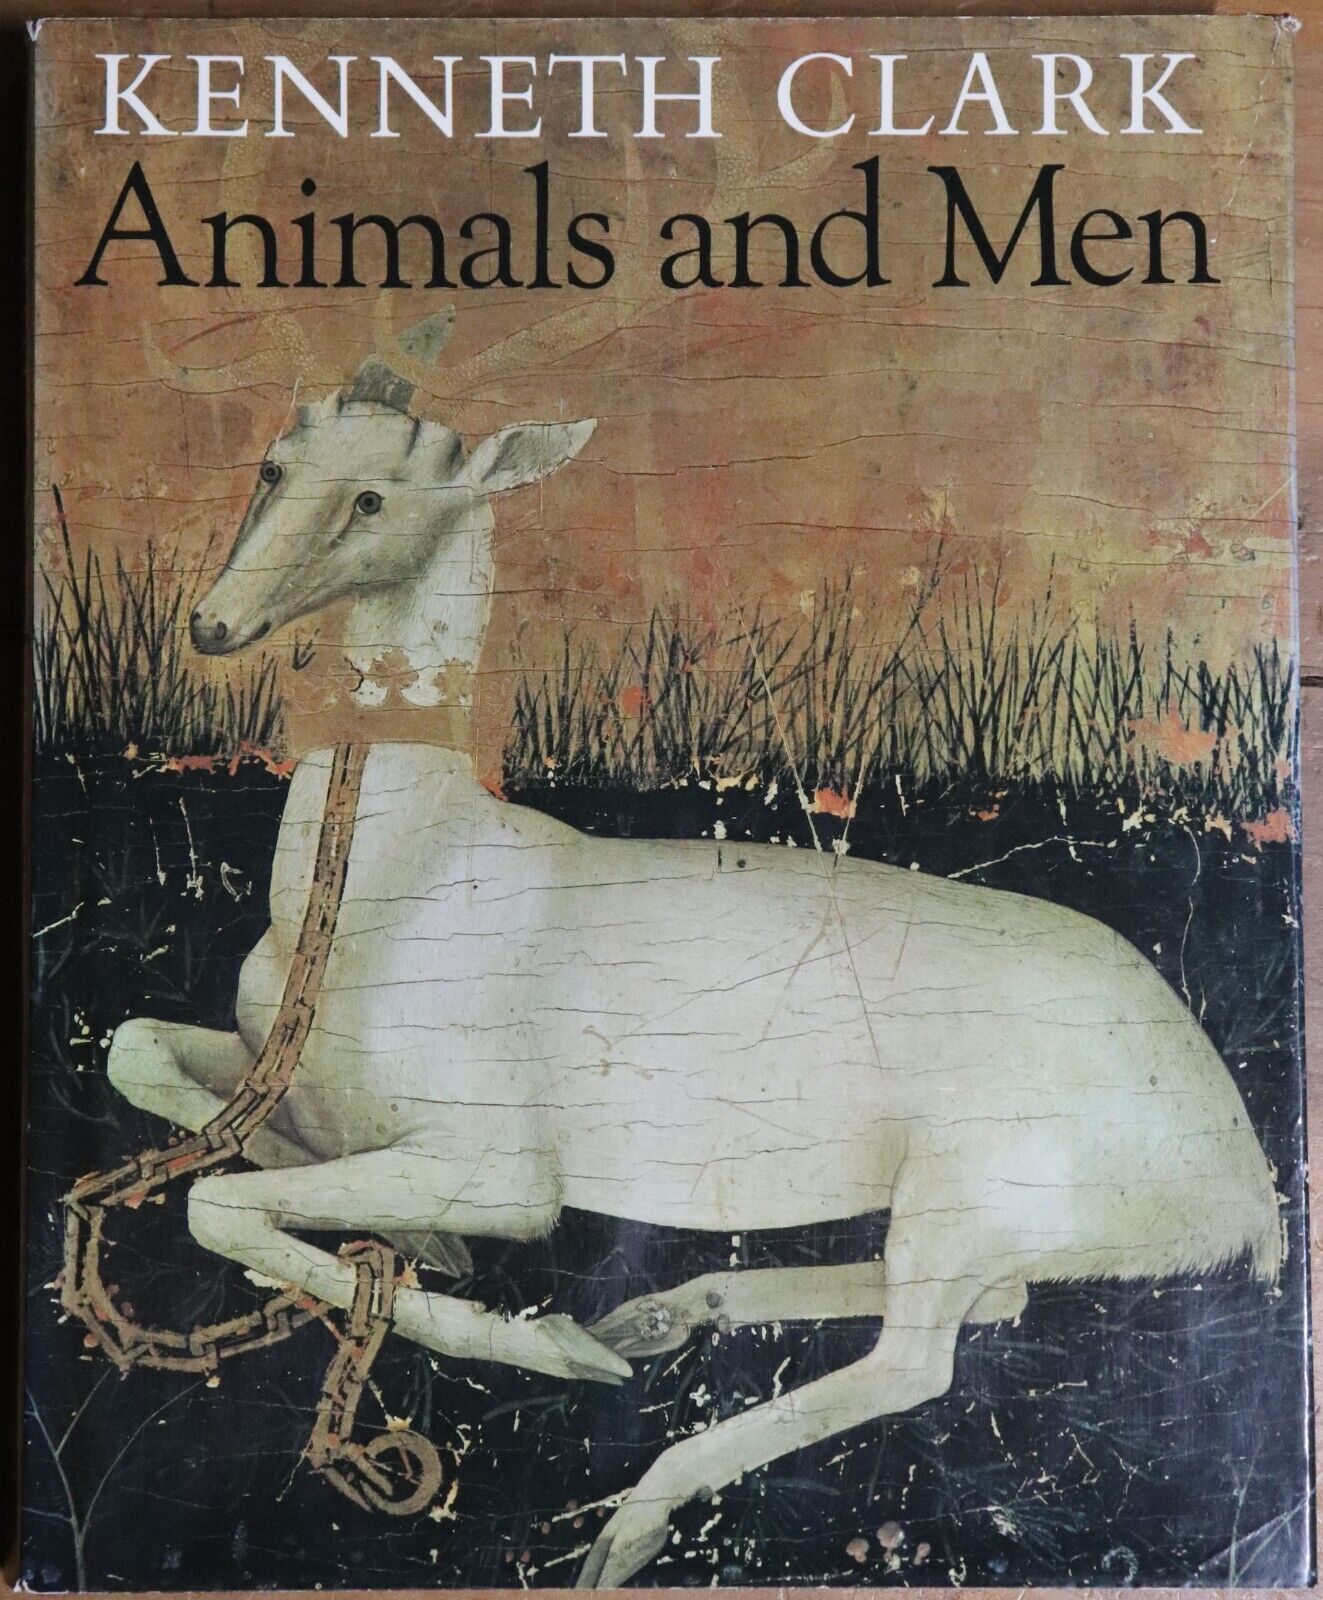 Animals And Men by Kenneth Clark - 1977 - History Of Western Art Book